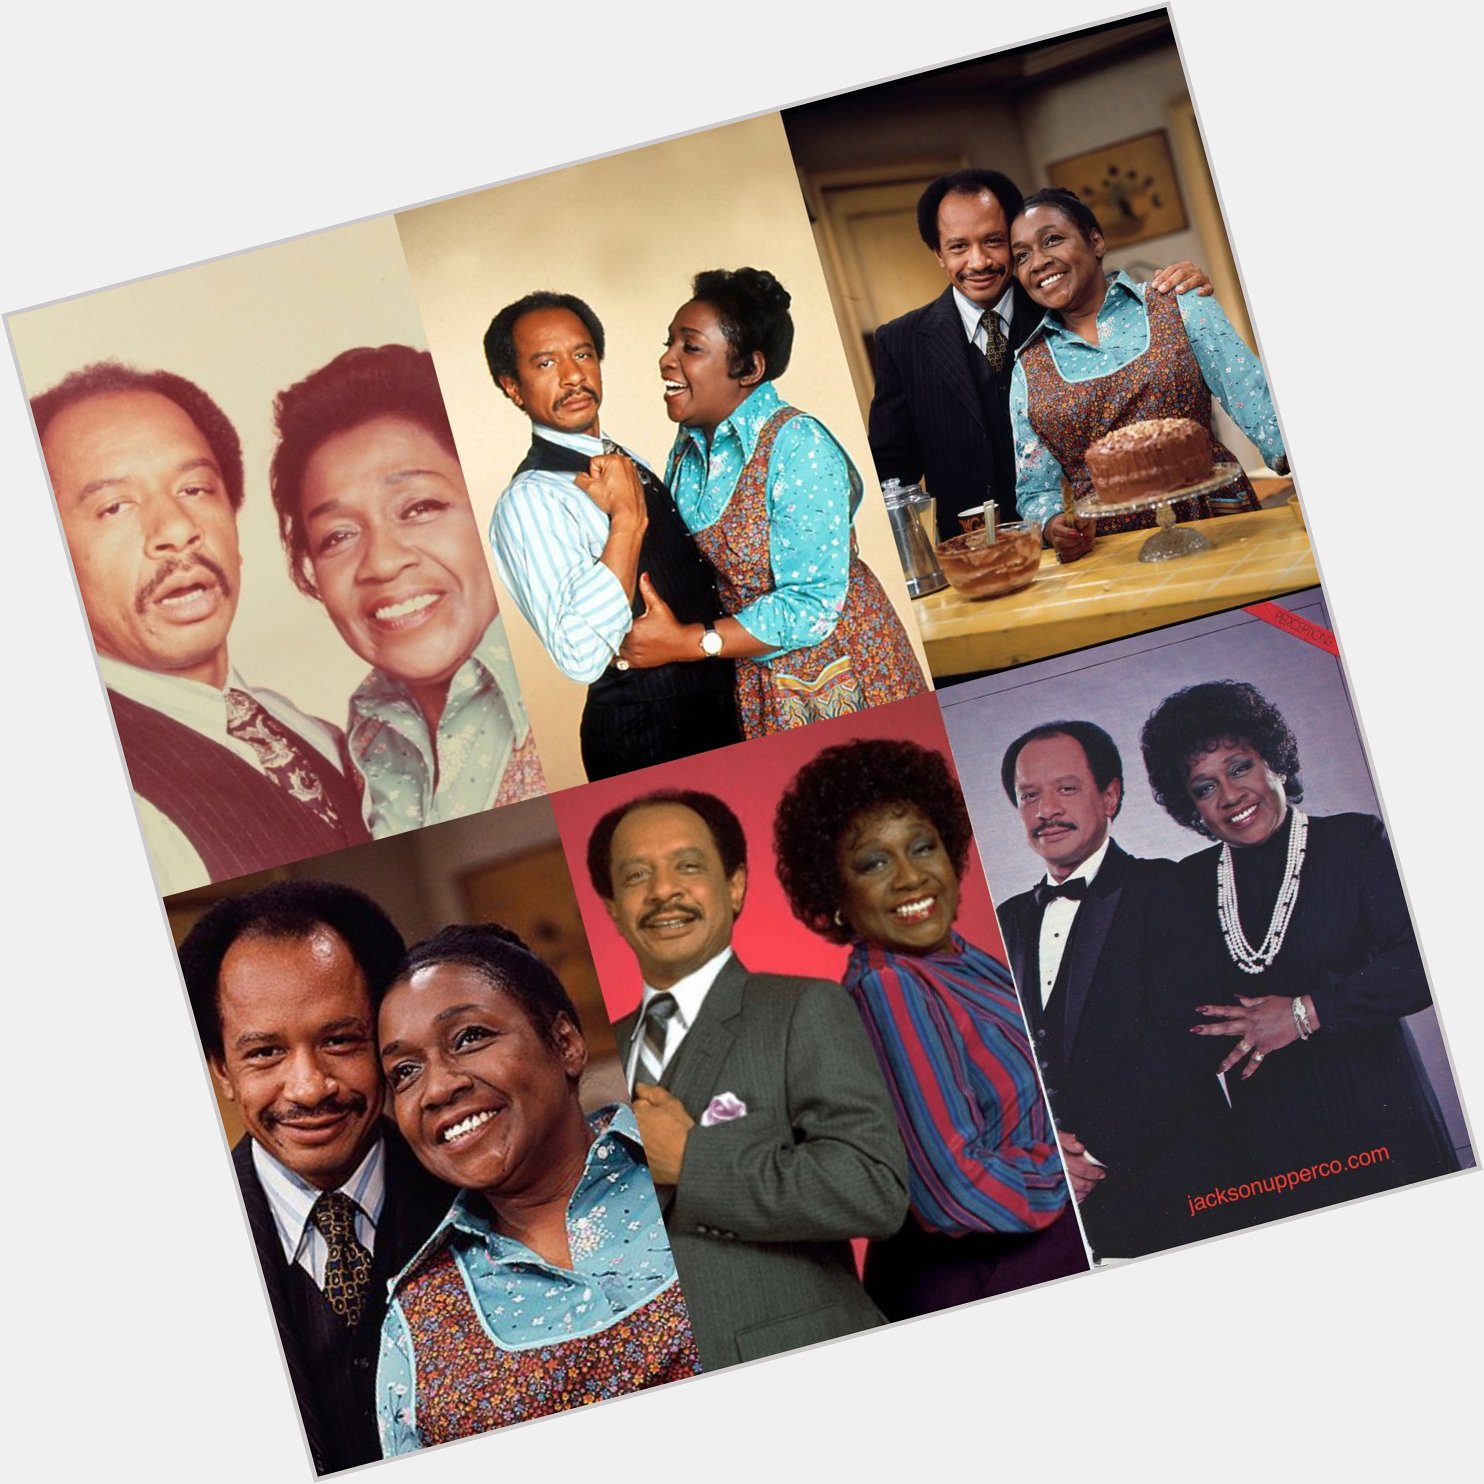 HAPPY BELATED 85TH BIRTHDAY SHERMAN HEMSLEY. REST IN HEAVEN TO YOU & ISABEL SANFORD. 